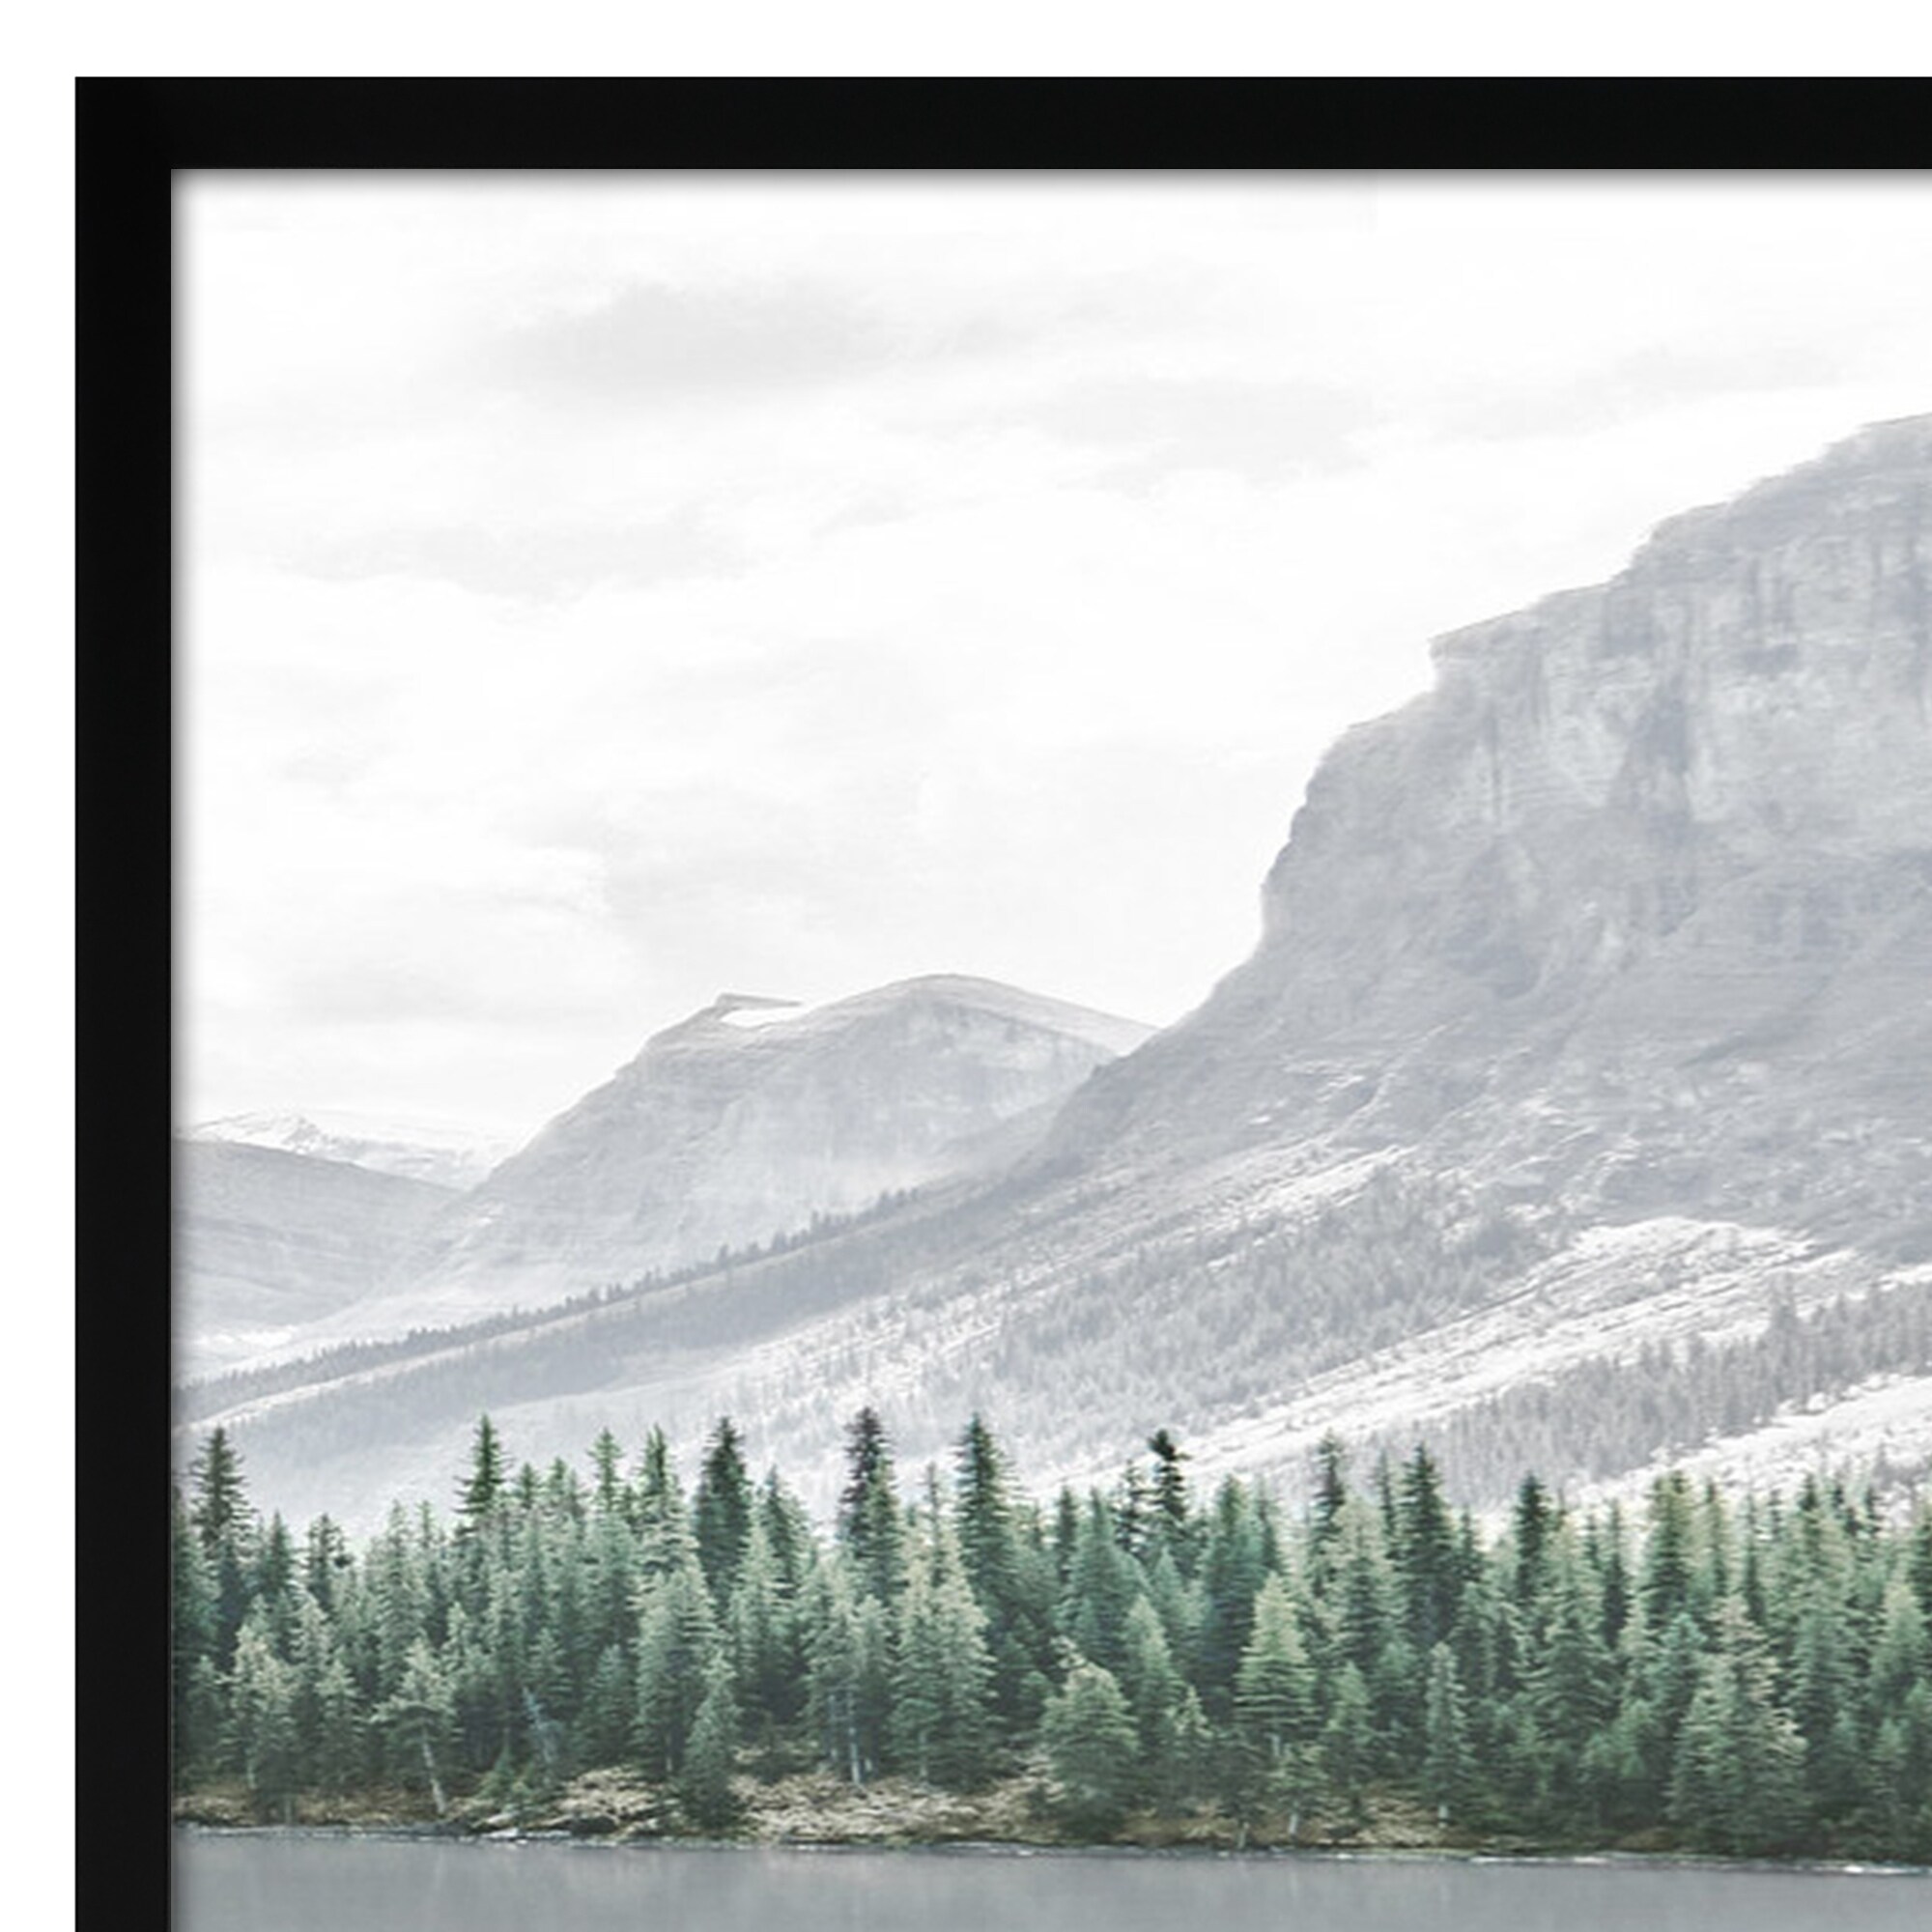 Americanflat 3 Piece 16x20 Wrapped Canvas Set - Utah National Park